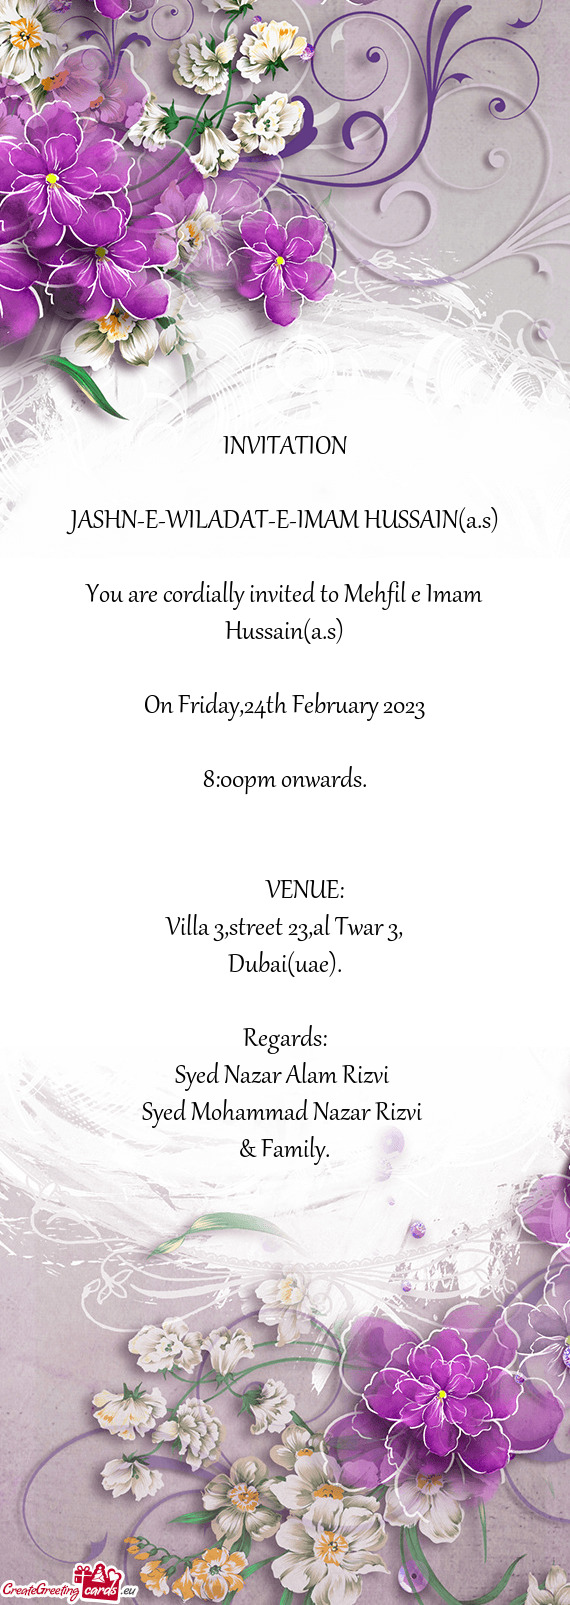 You are cordially invited to Mehfil e Imam Hussain(a.s)